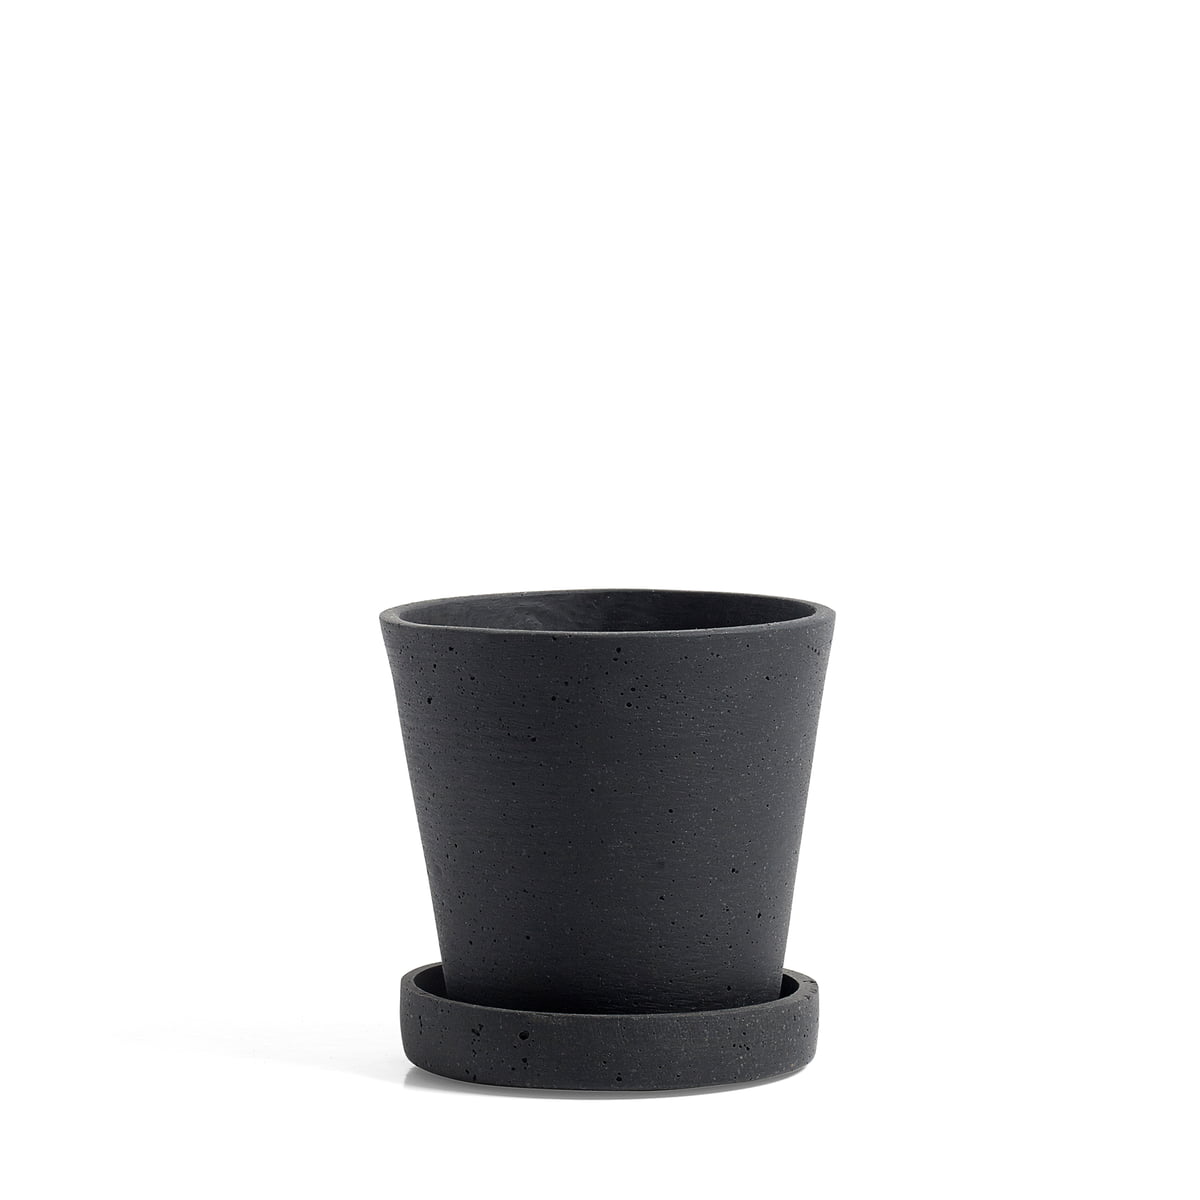 Authentic HAY Flowerpot with Saucer MDesign Within Reach 